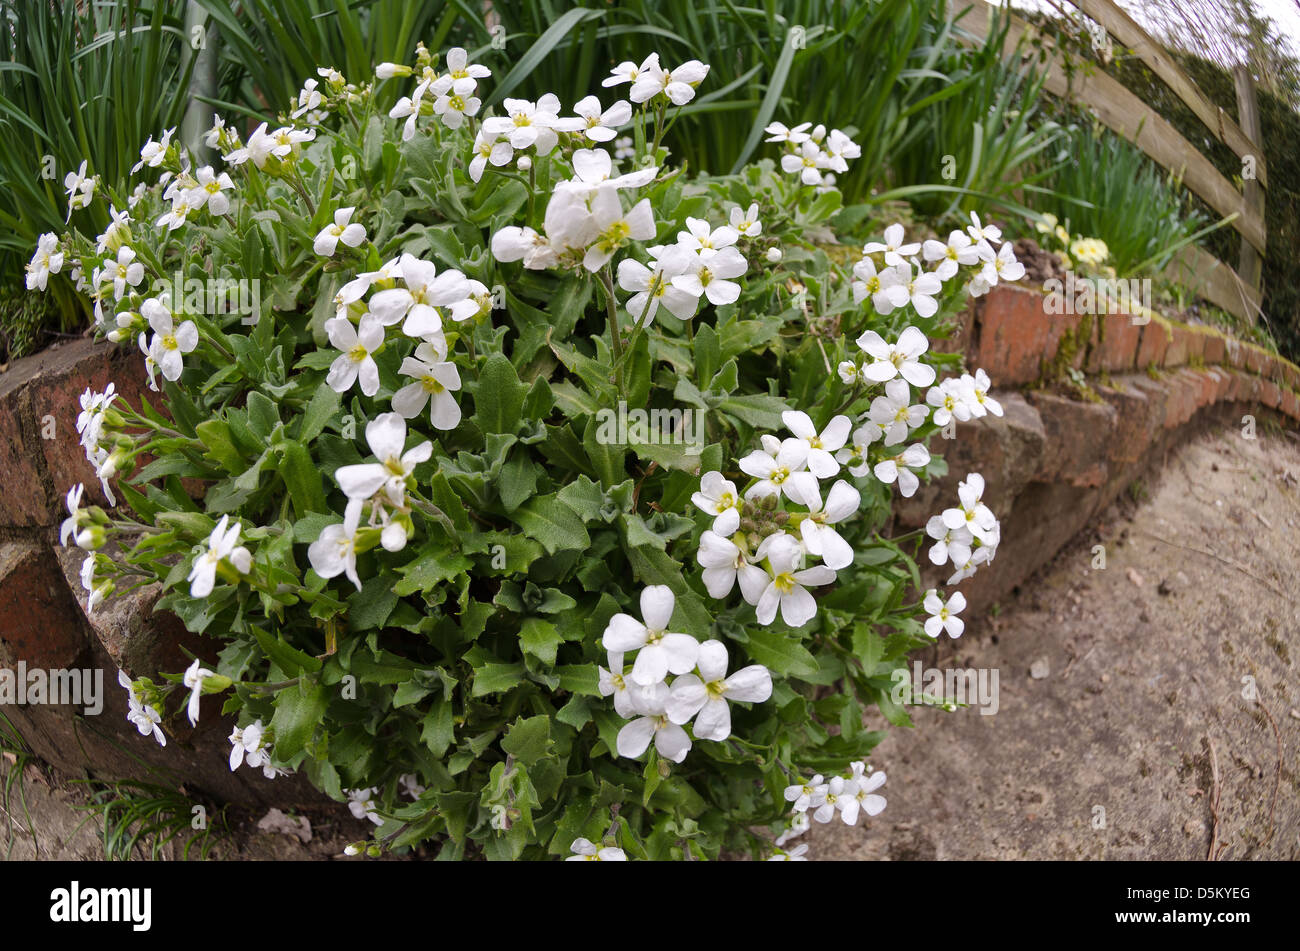 Clump of hanging white wall plant rock cress against a red clay brick country cottage wall and open wooden rail fence Stock Photo